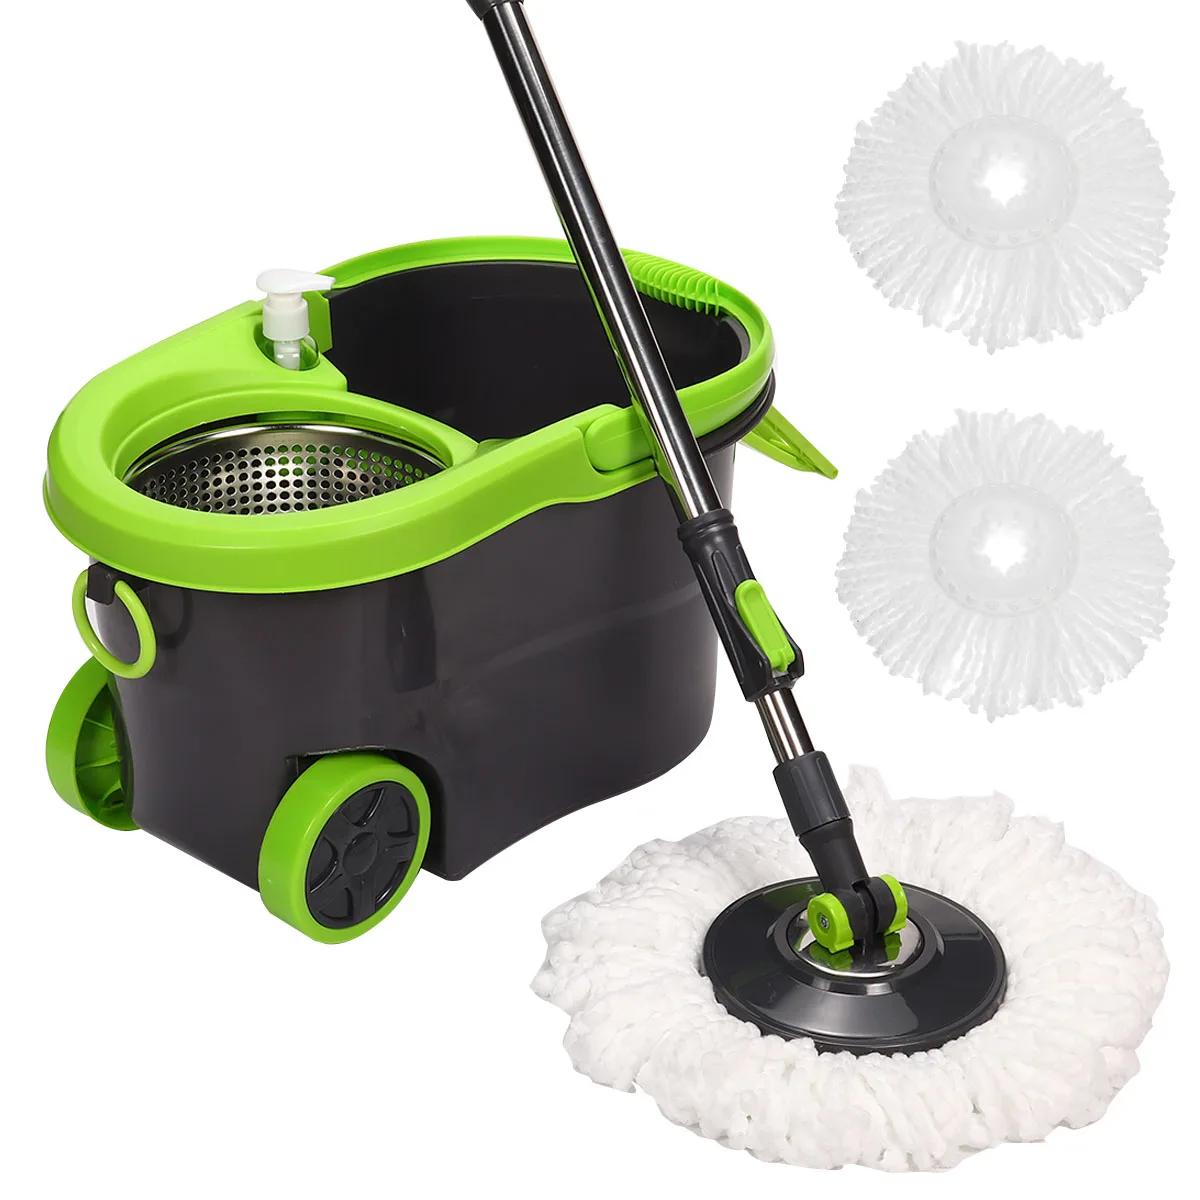 

360 Rotating Spin Floor Mop Bucket Set with 2 Microfiber Head Hands Free Wringing Home Cleaning Tools Wet Dry Use on Wood Tiles